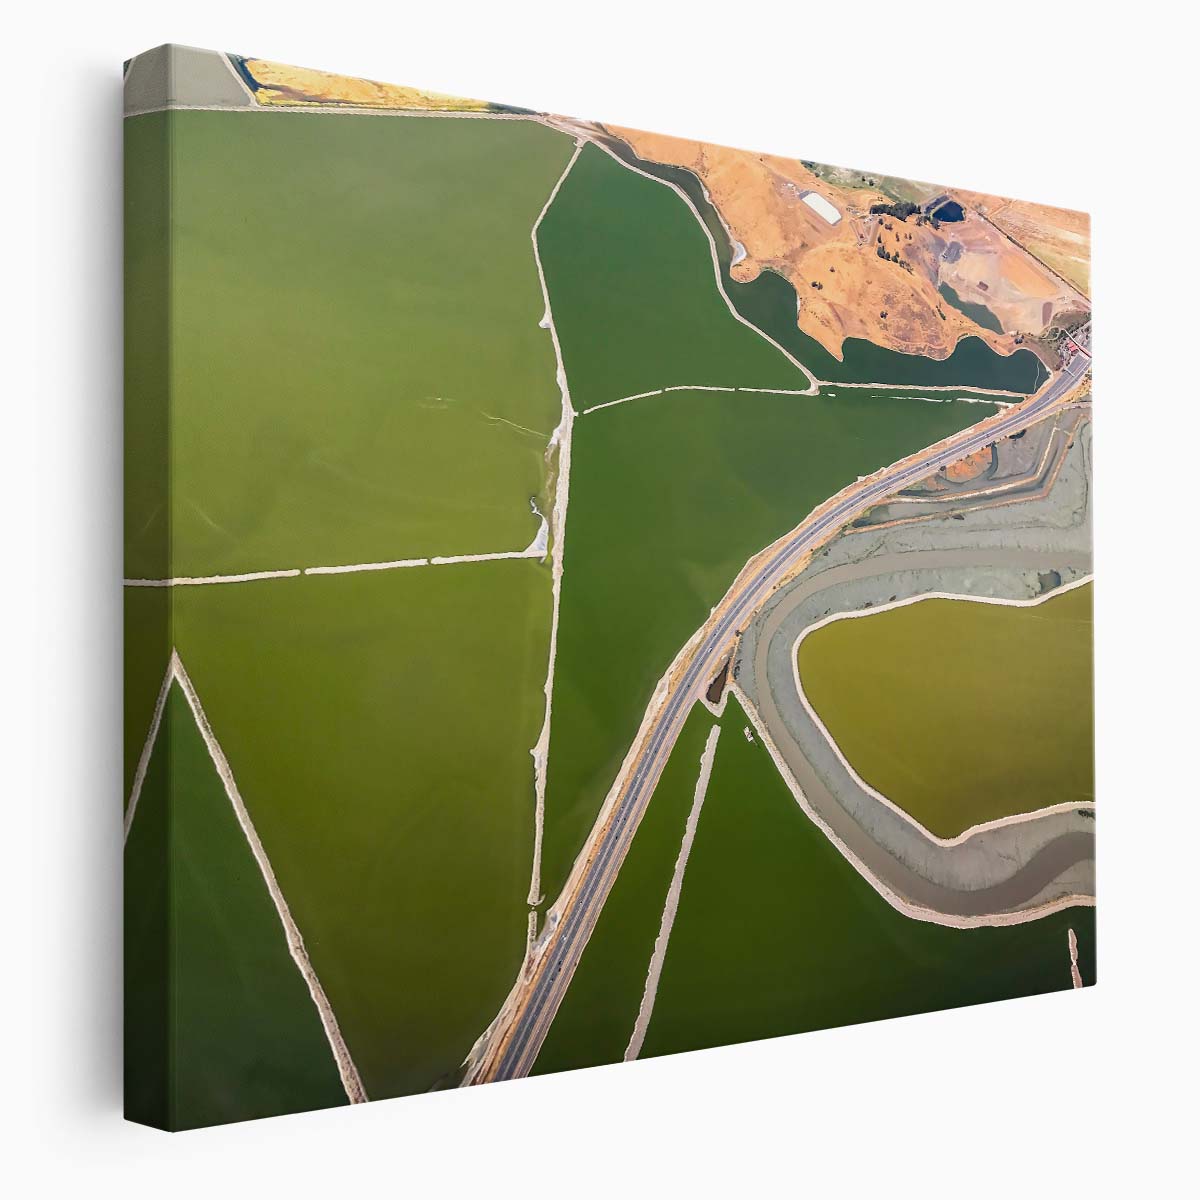 California Countryside Aerial Roadway Landscape Wall Art by Luxuriance Designs. Made in USA.